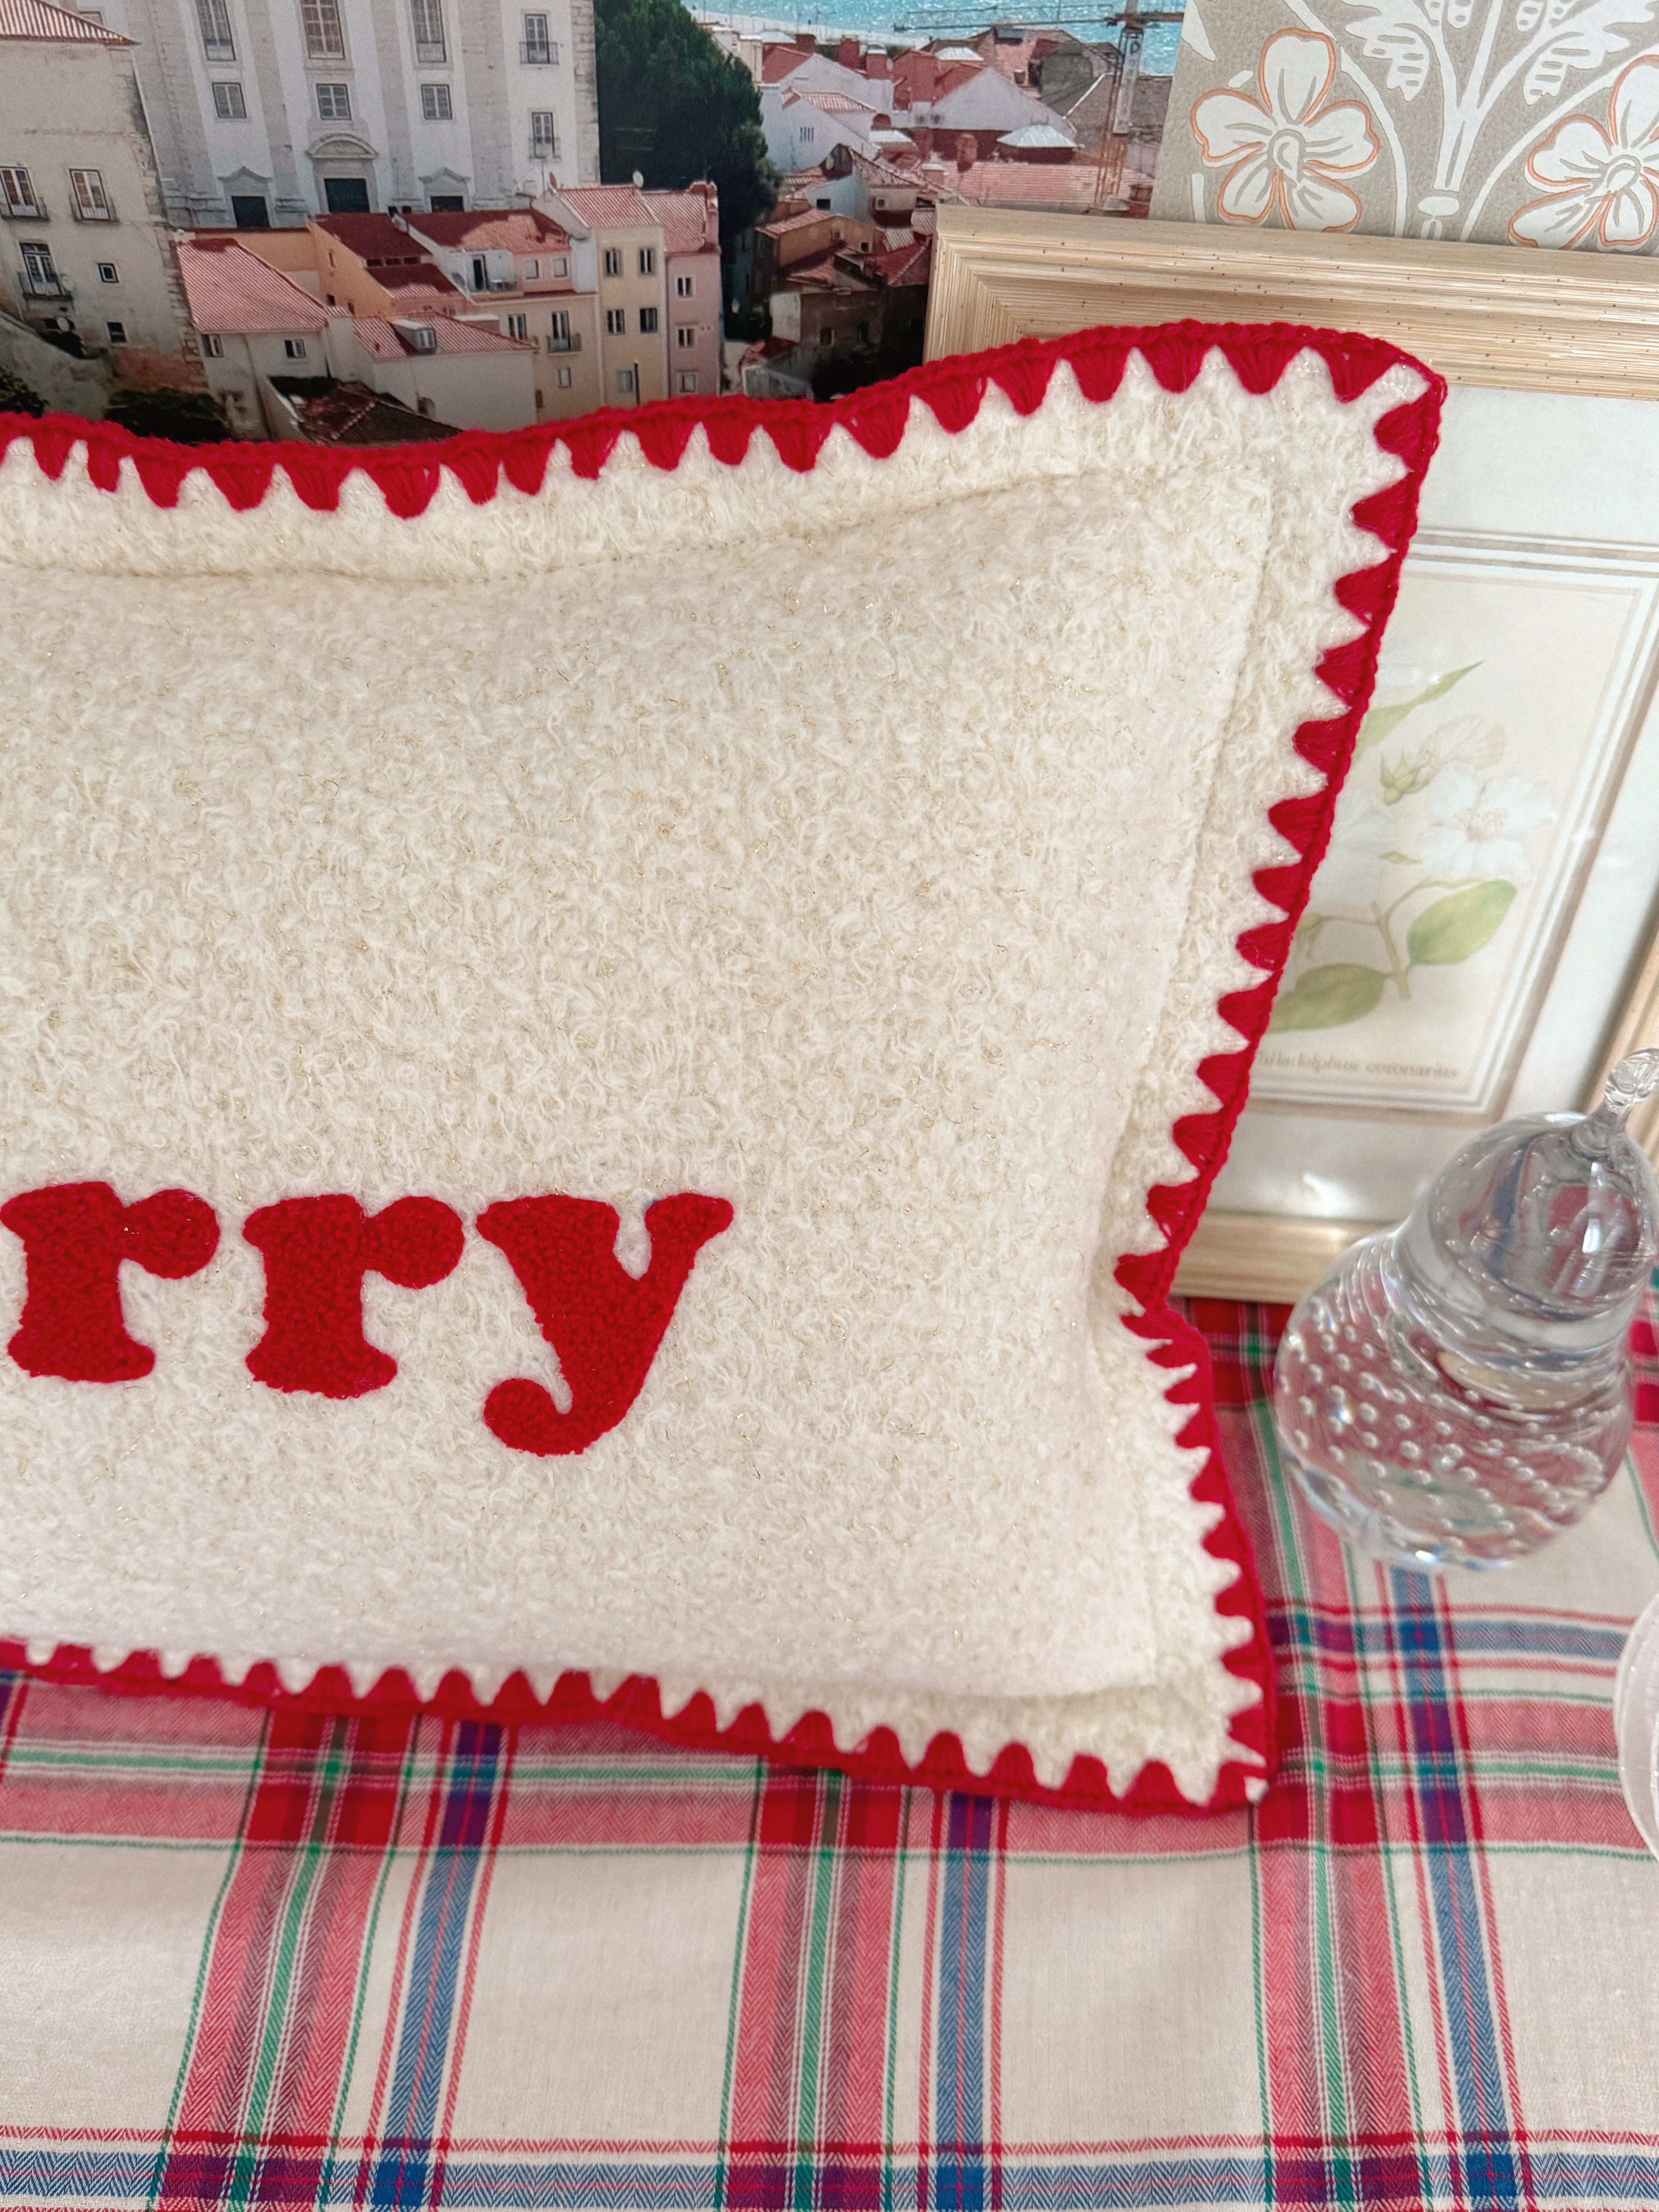 Merry Boucle Mini Cushion Red Point Embroidery Christmas